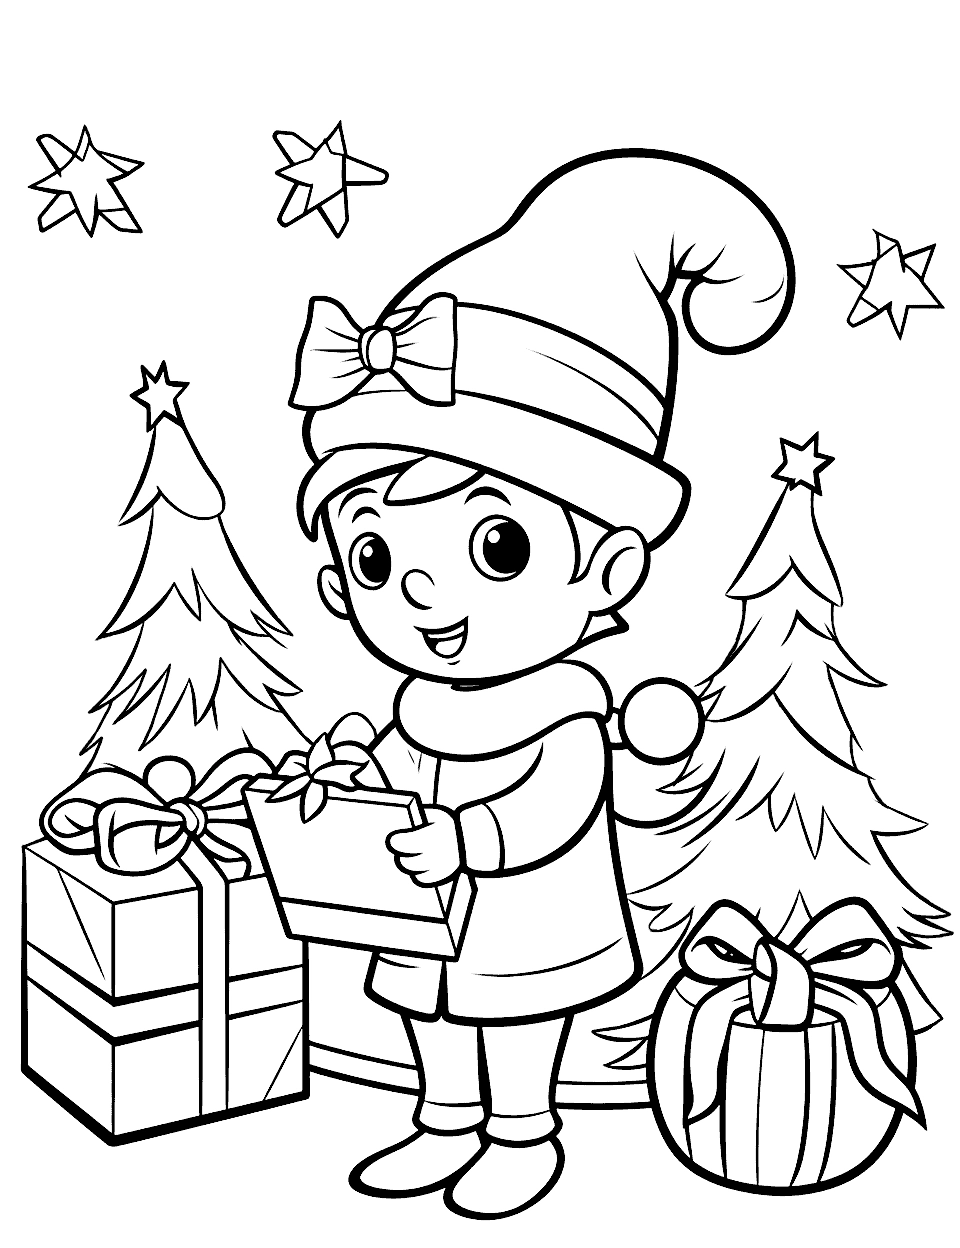 100 Christmas Coloring Pages: Free Printable Sheets with regard to Free Printable Holiday Coloring Pages